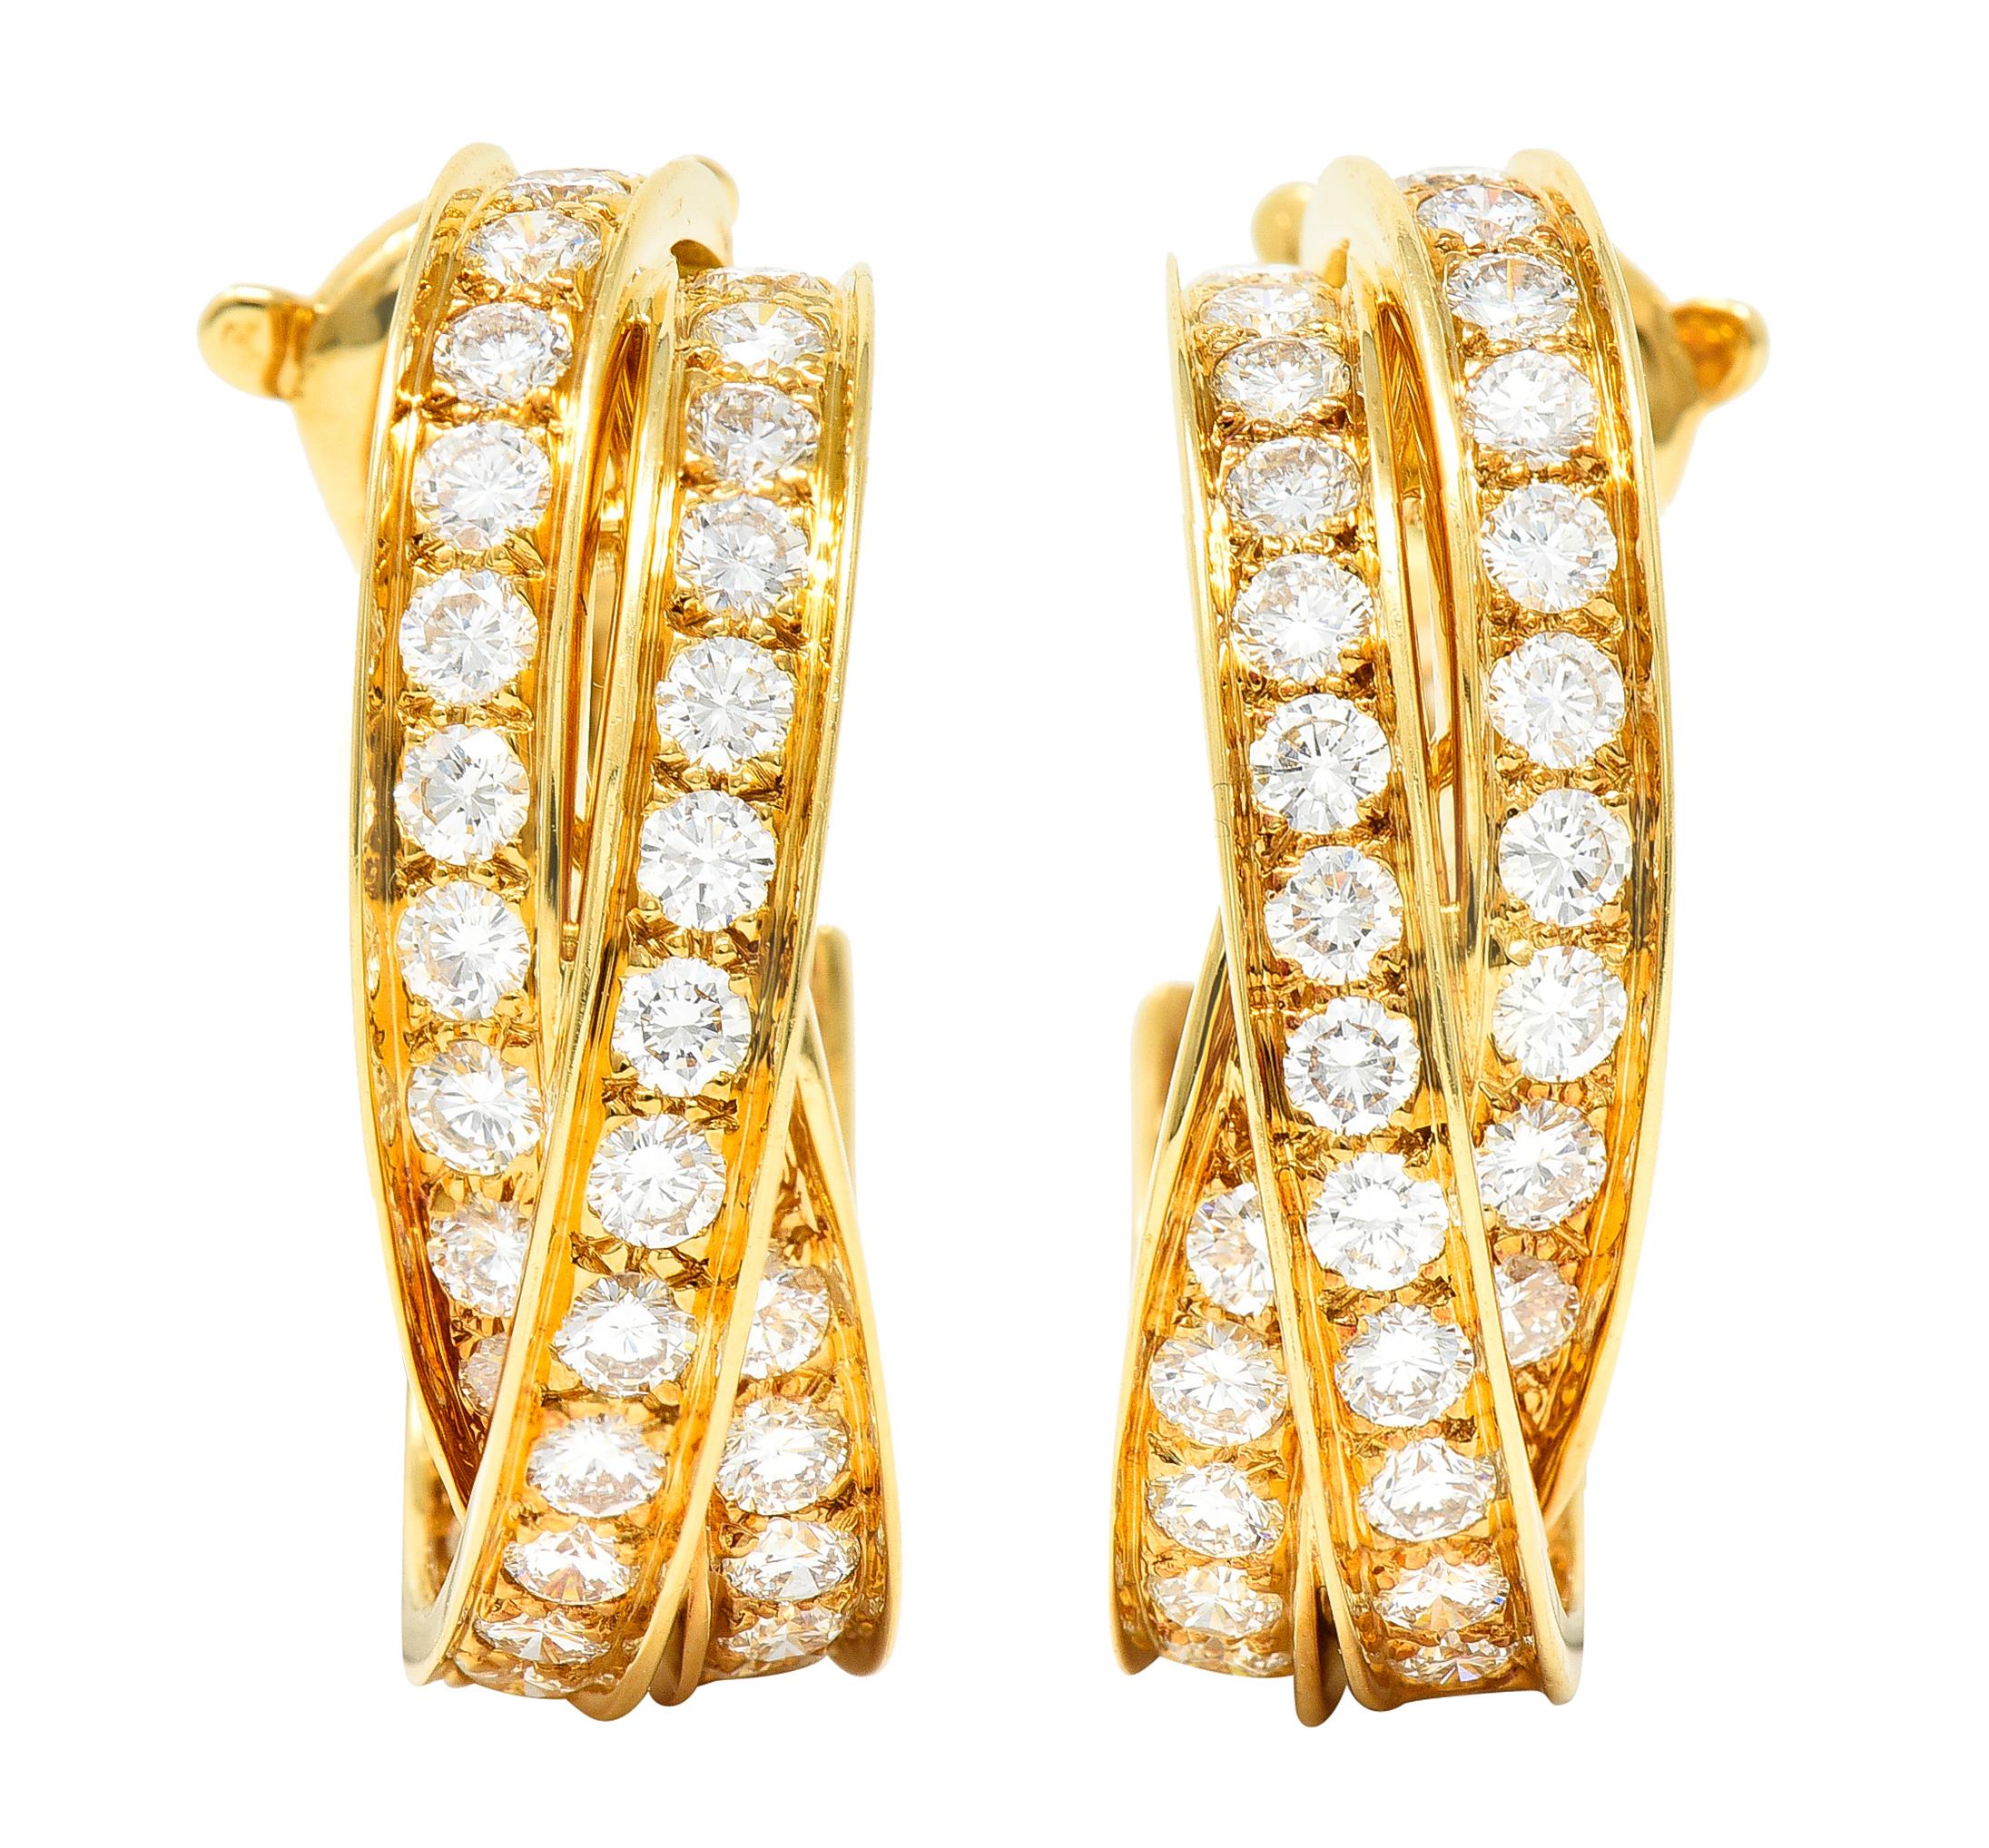 Inside/outside style earrings are designed as three twisting bands with round brilliant cut diamonds. Bead set in recessed channels and weighing approximately 6.15 carats total. F/G in color with VS clarity. Completed by posts with hinged omega